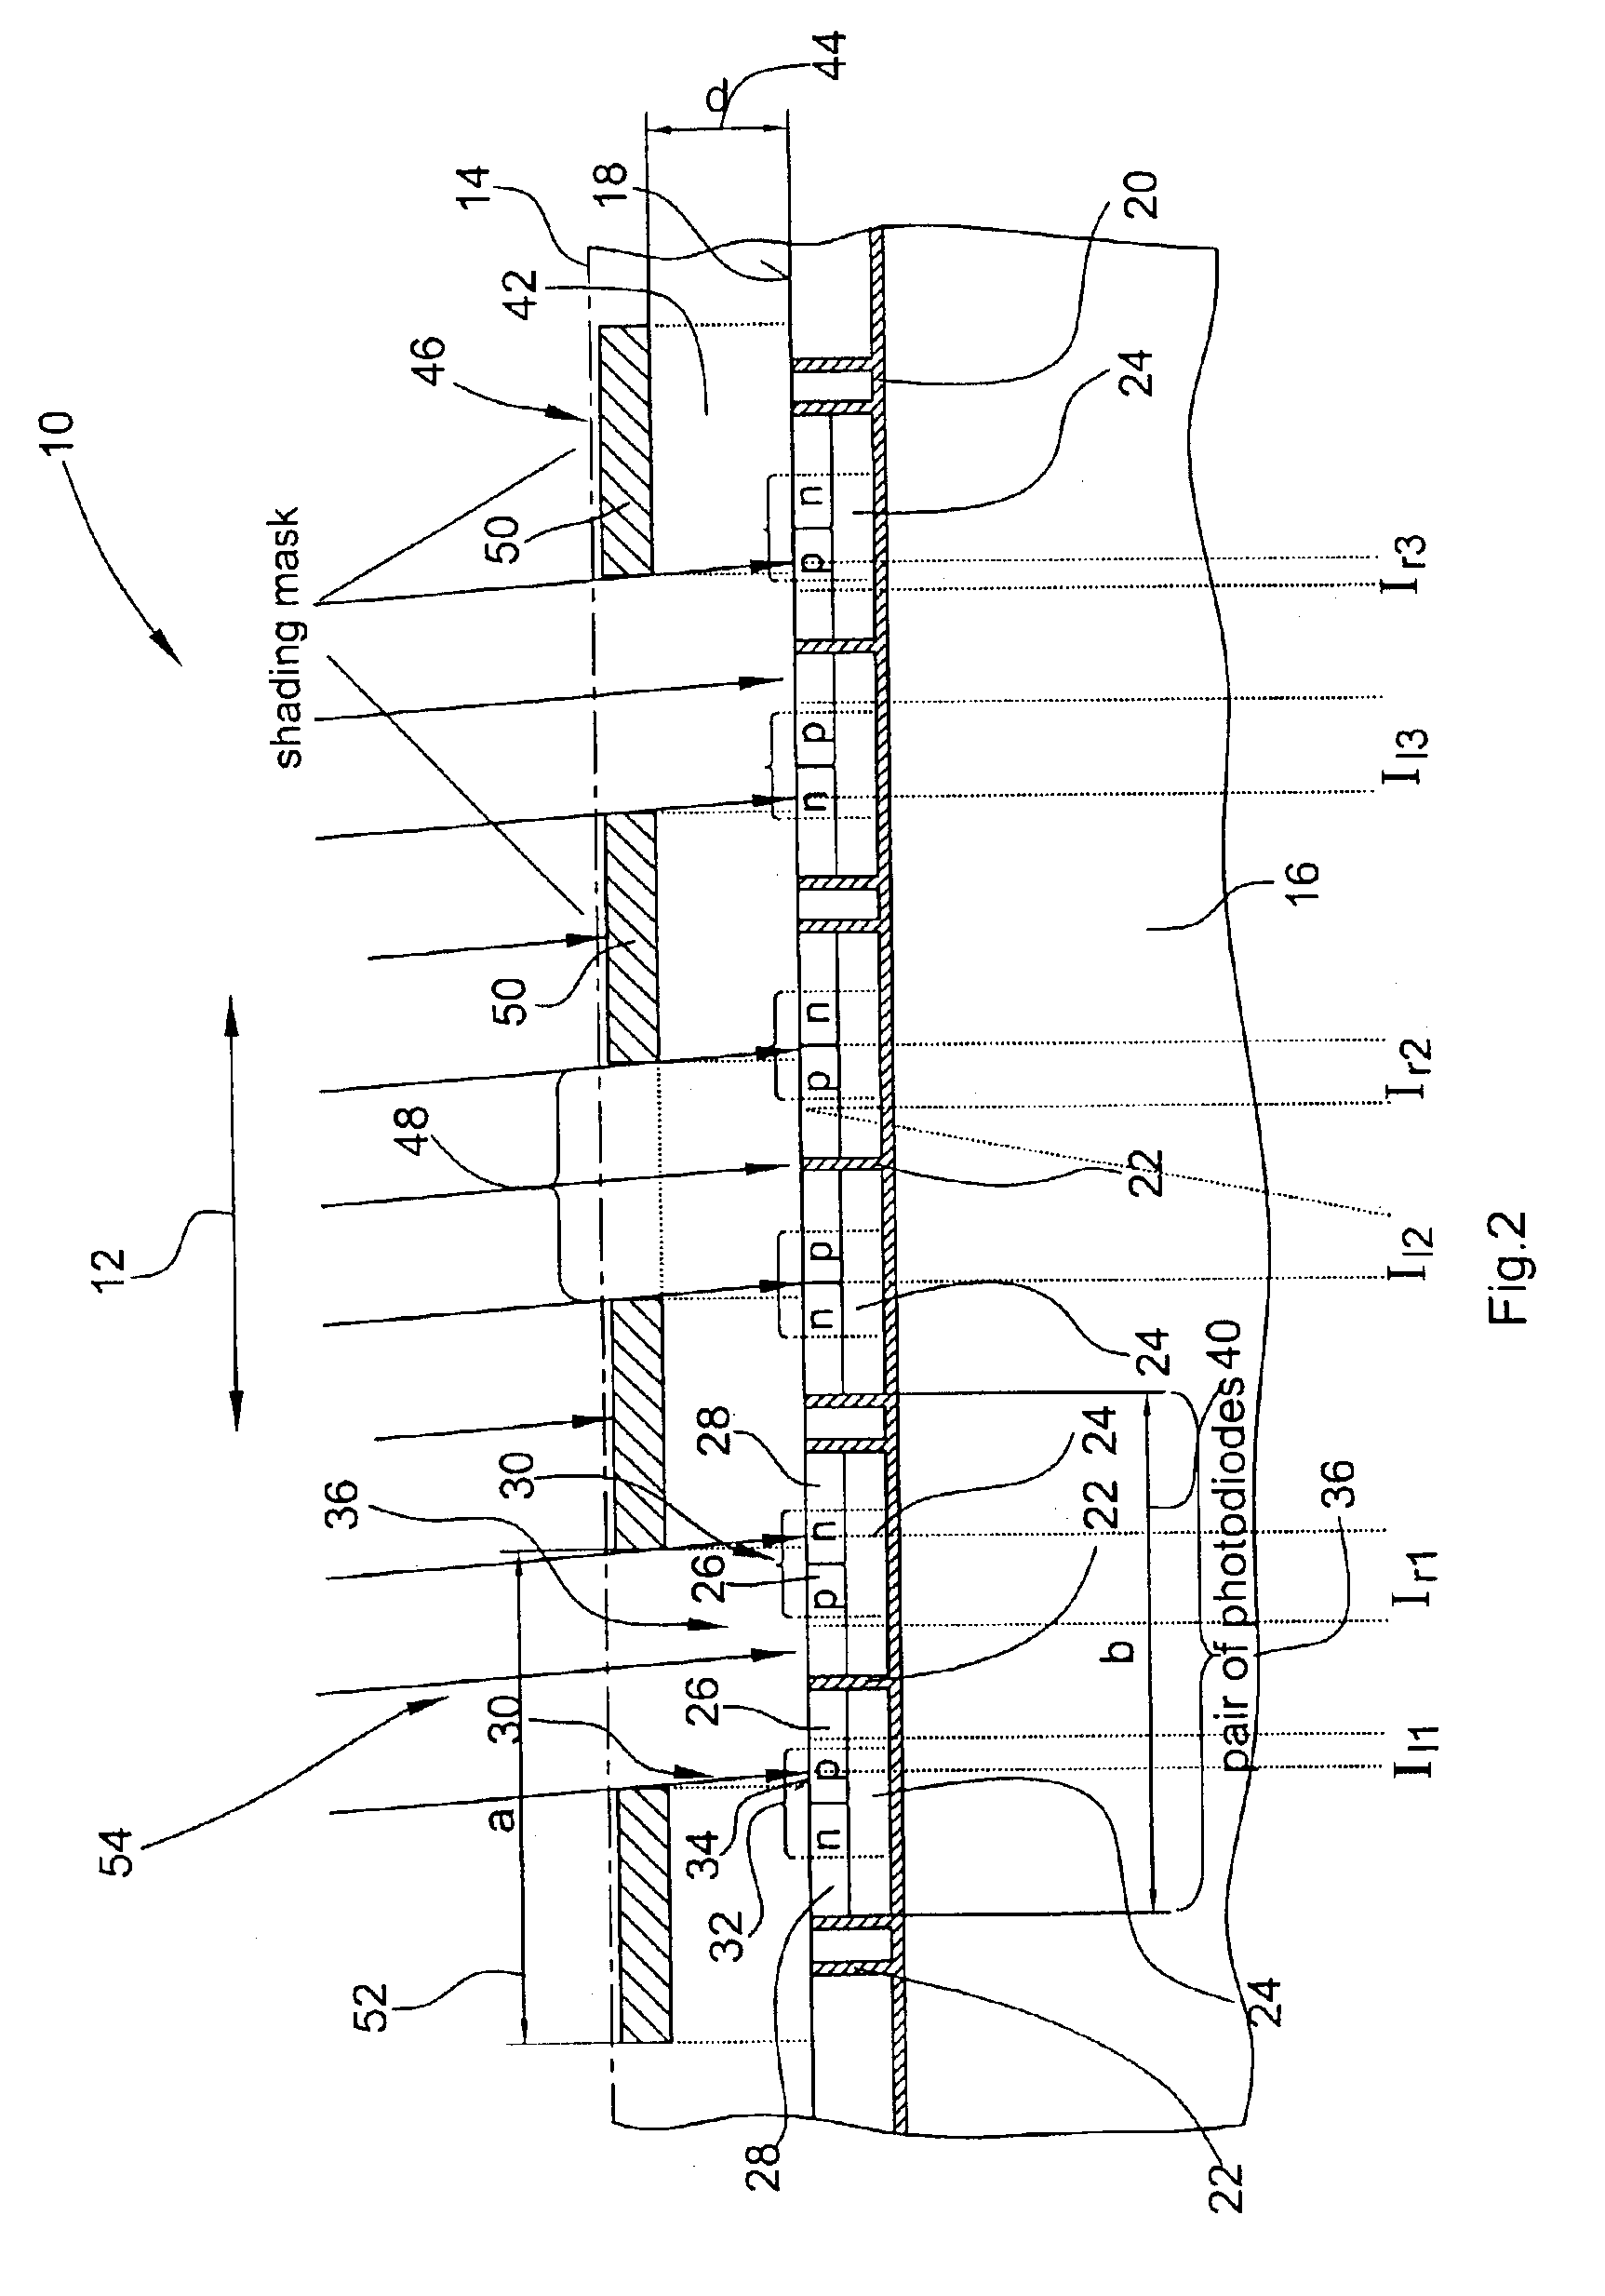 Device for detecting the angle of incidence of radiation on a radiation incidence surface